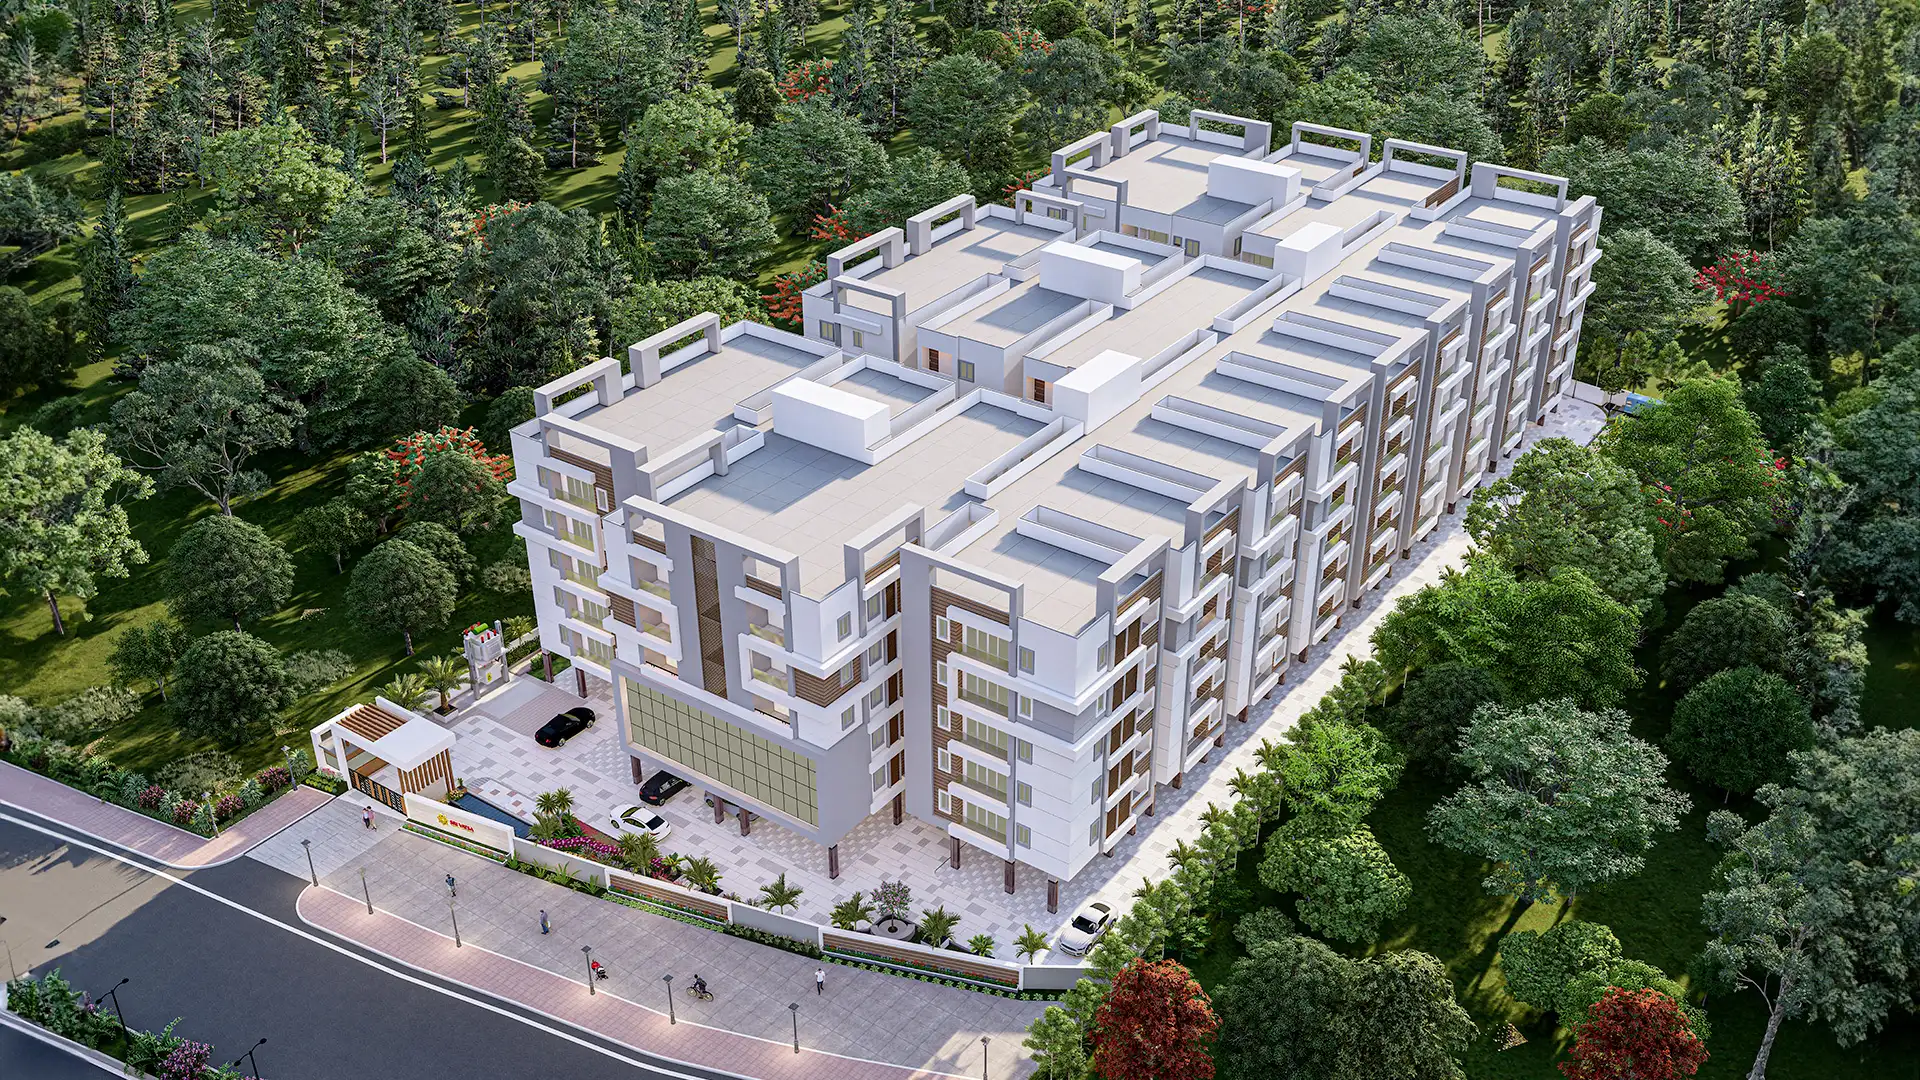 2 & 3 BHK apartments in Mallampet, Hyderabad